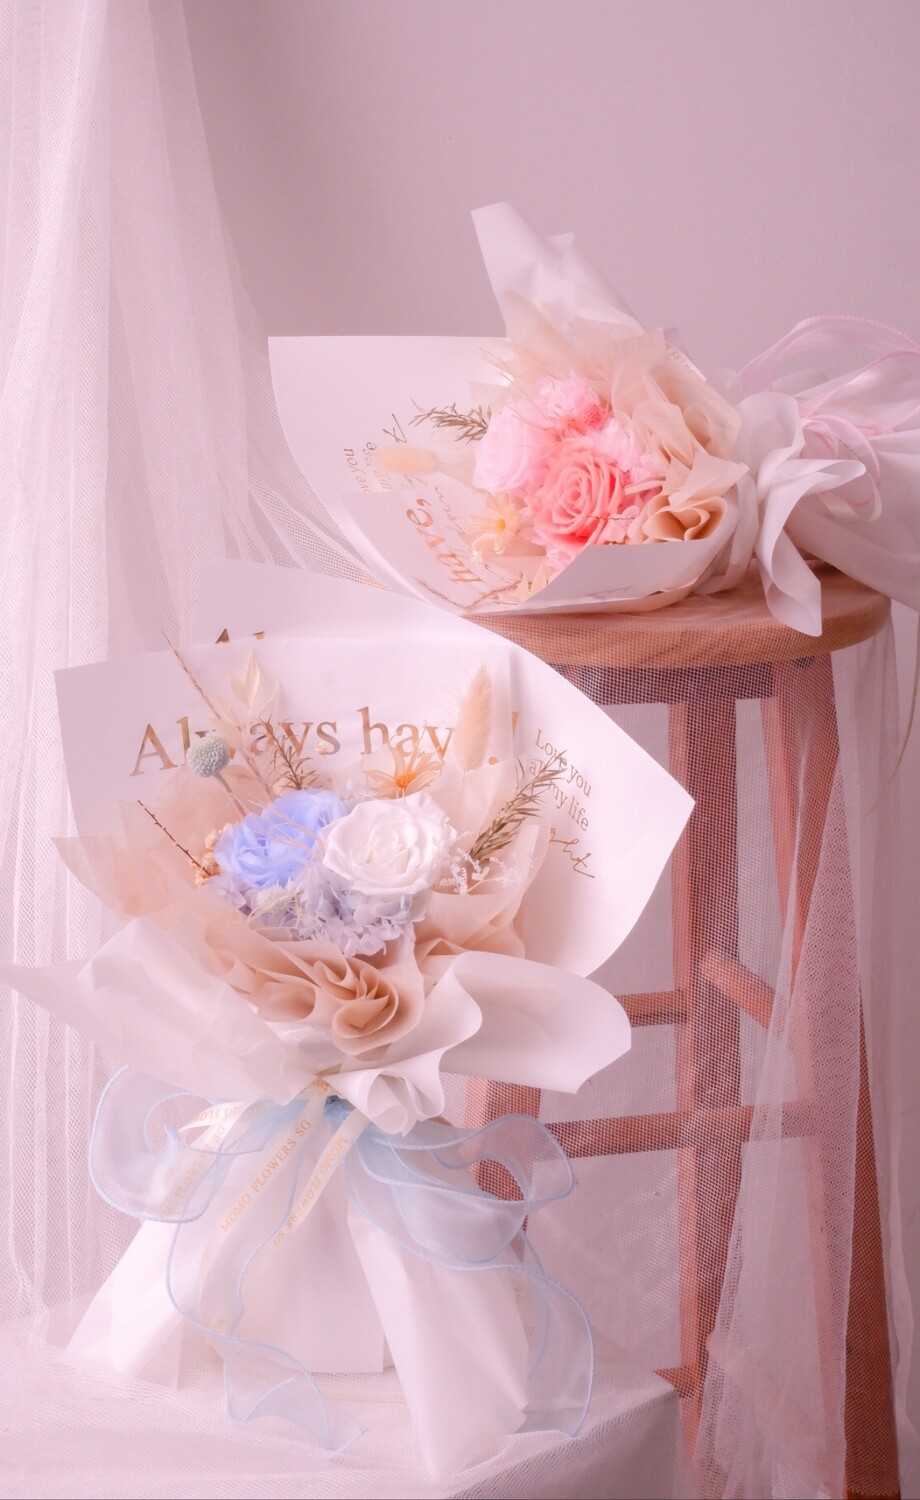 VDAY SPECIAL: "Forever & Always" Bouquet